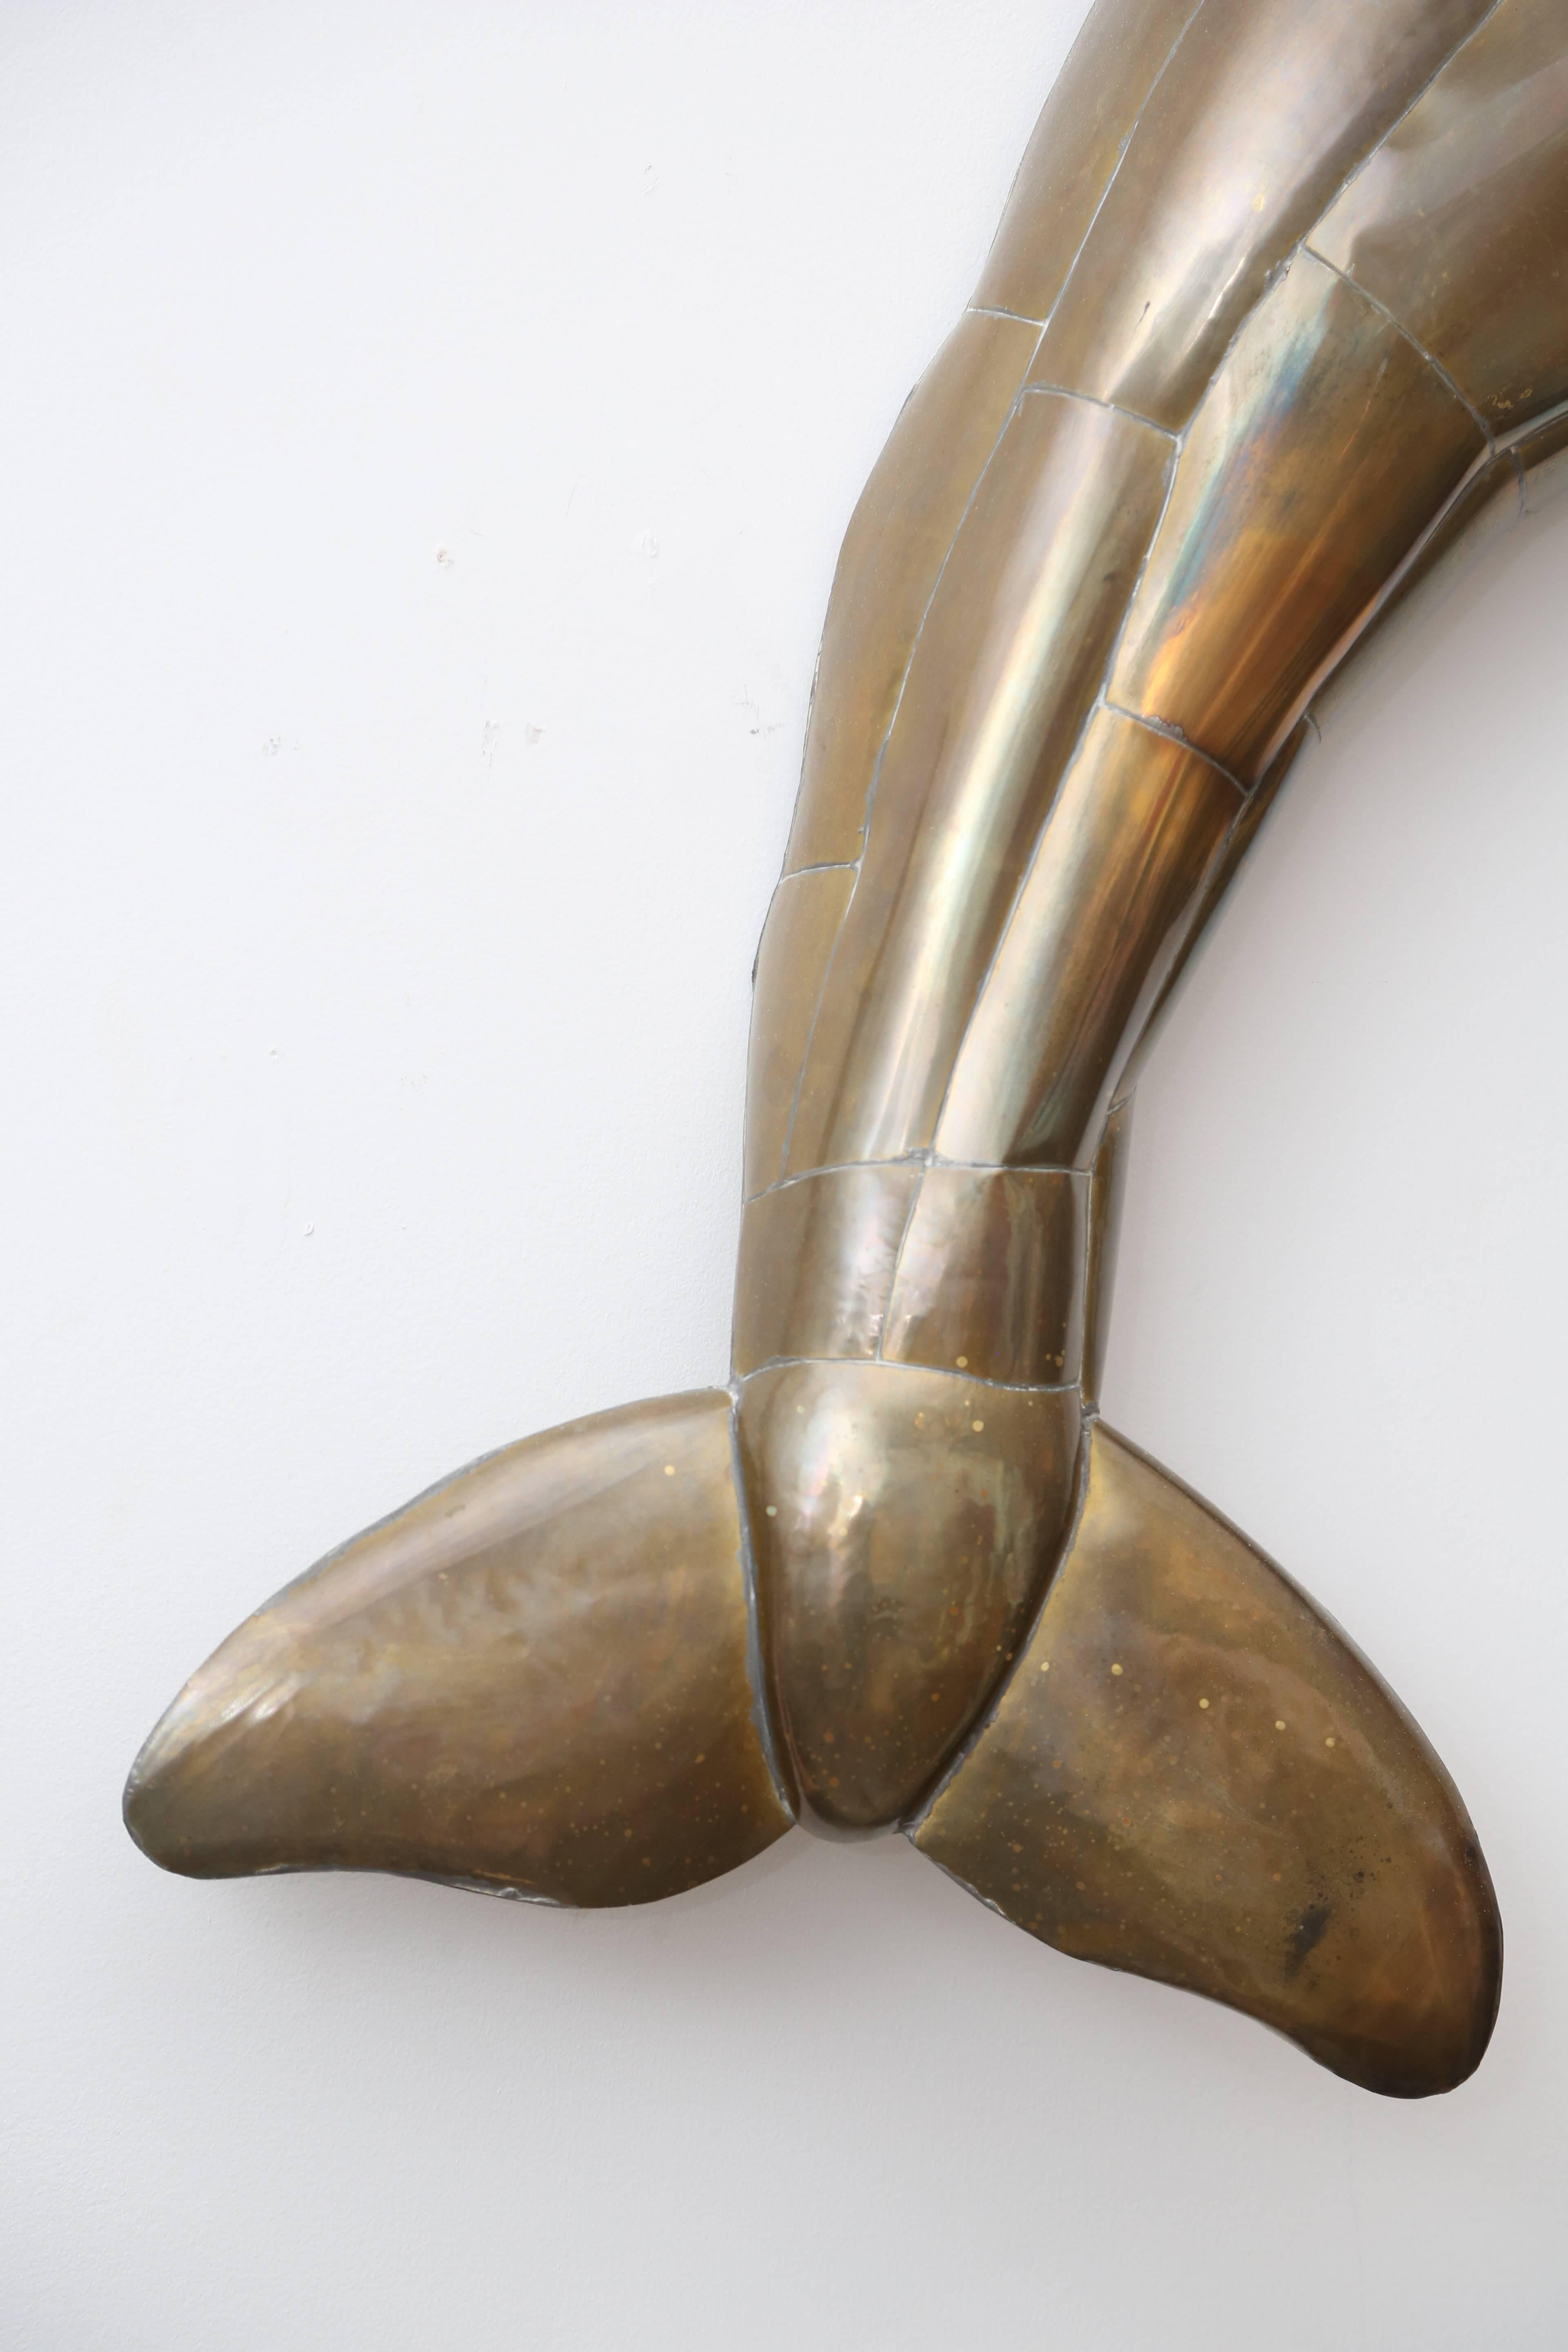 Huge Vintage Bustamante Dolphin Wall Sculpture In Good Condition For Sale In West Palm Beach, FL